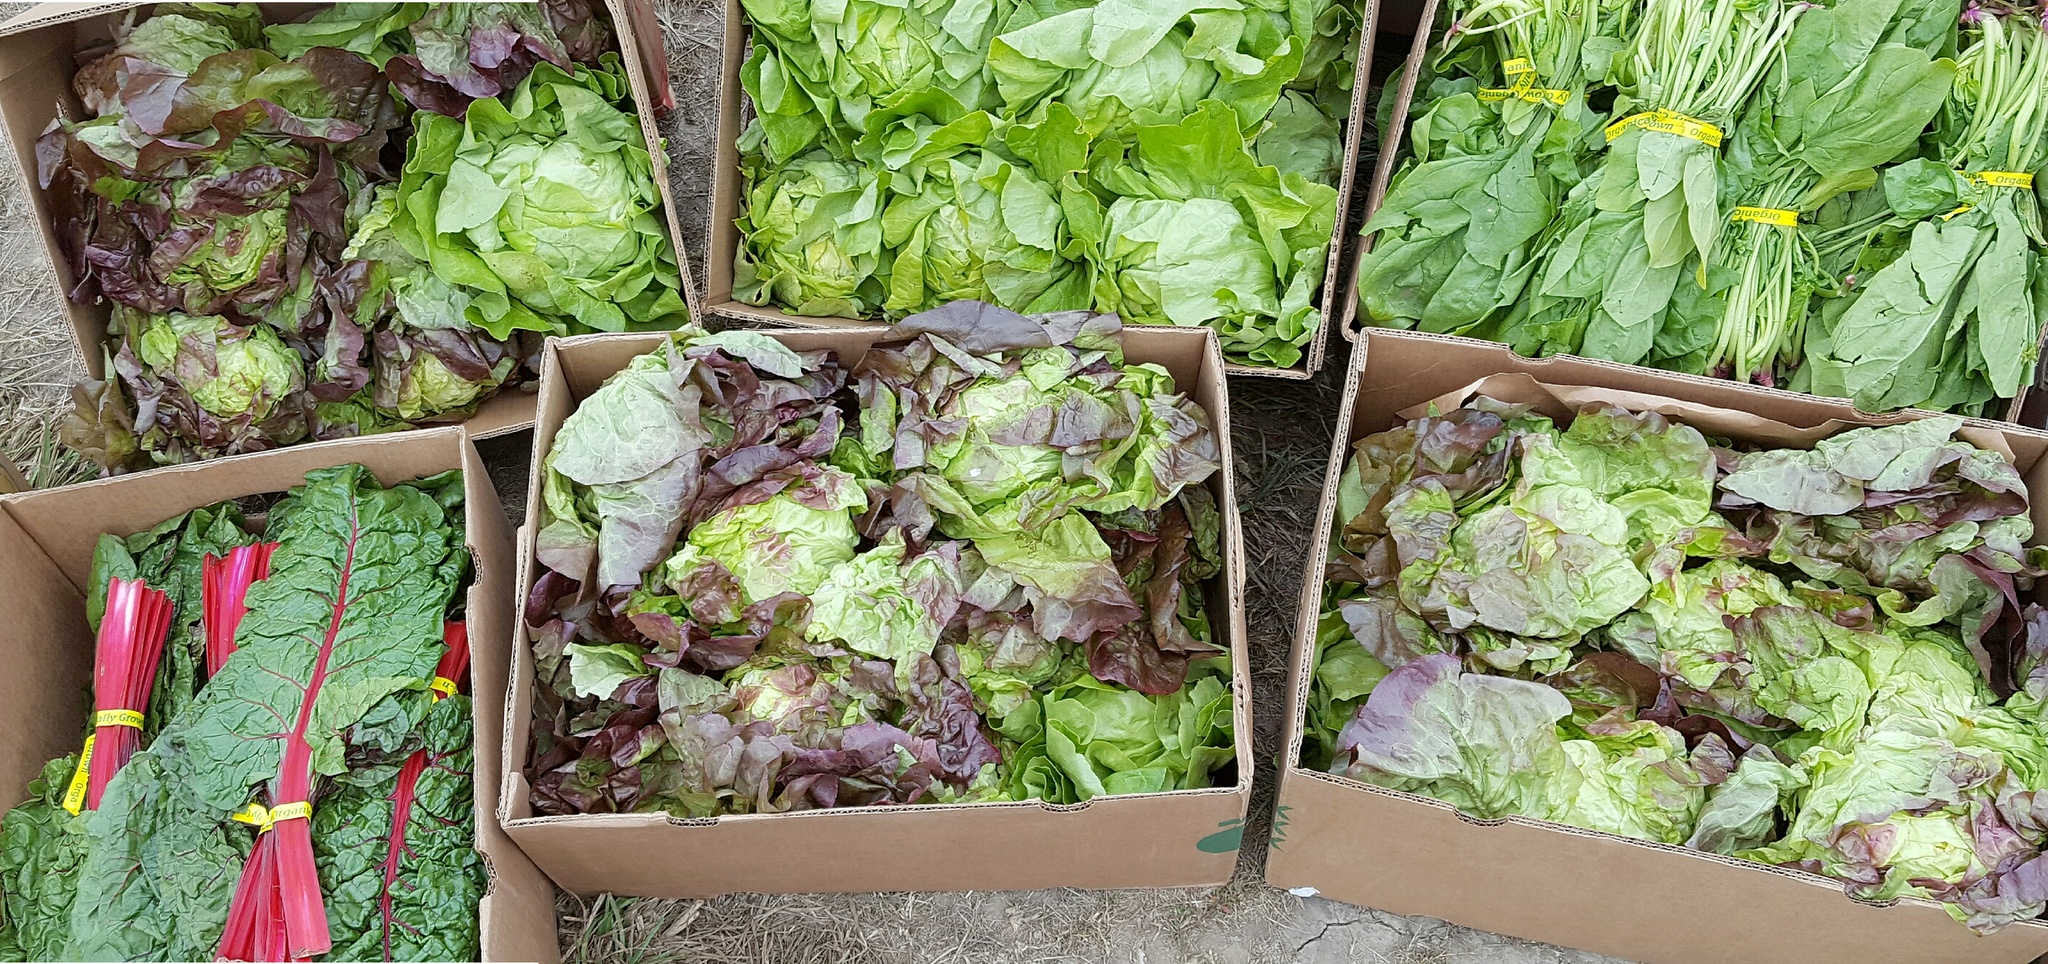 River Run Farm in Sequim helped supply the WSU Extension Office’s food reduction and gleaning program with some of its 25,000 pounds collected from farms and homes in Sequim and Port Angeles in 2016. Photo courtesy of Dan Littlefield